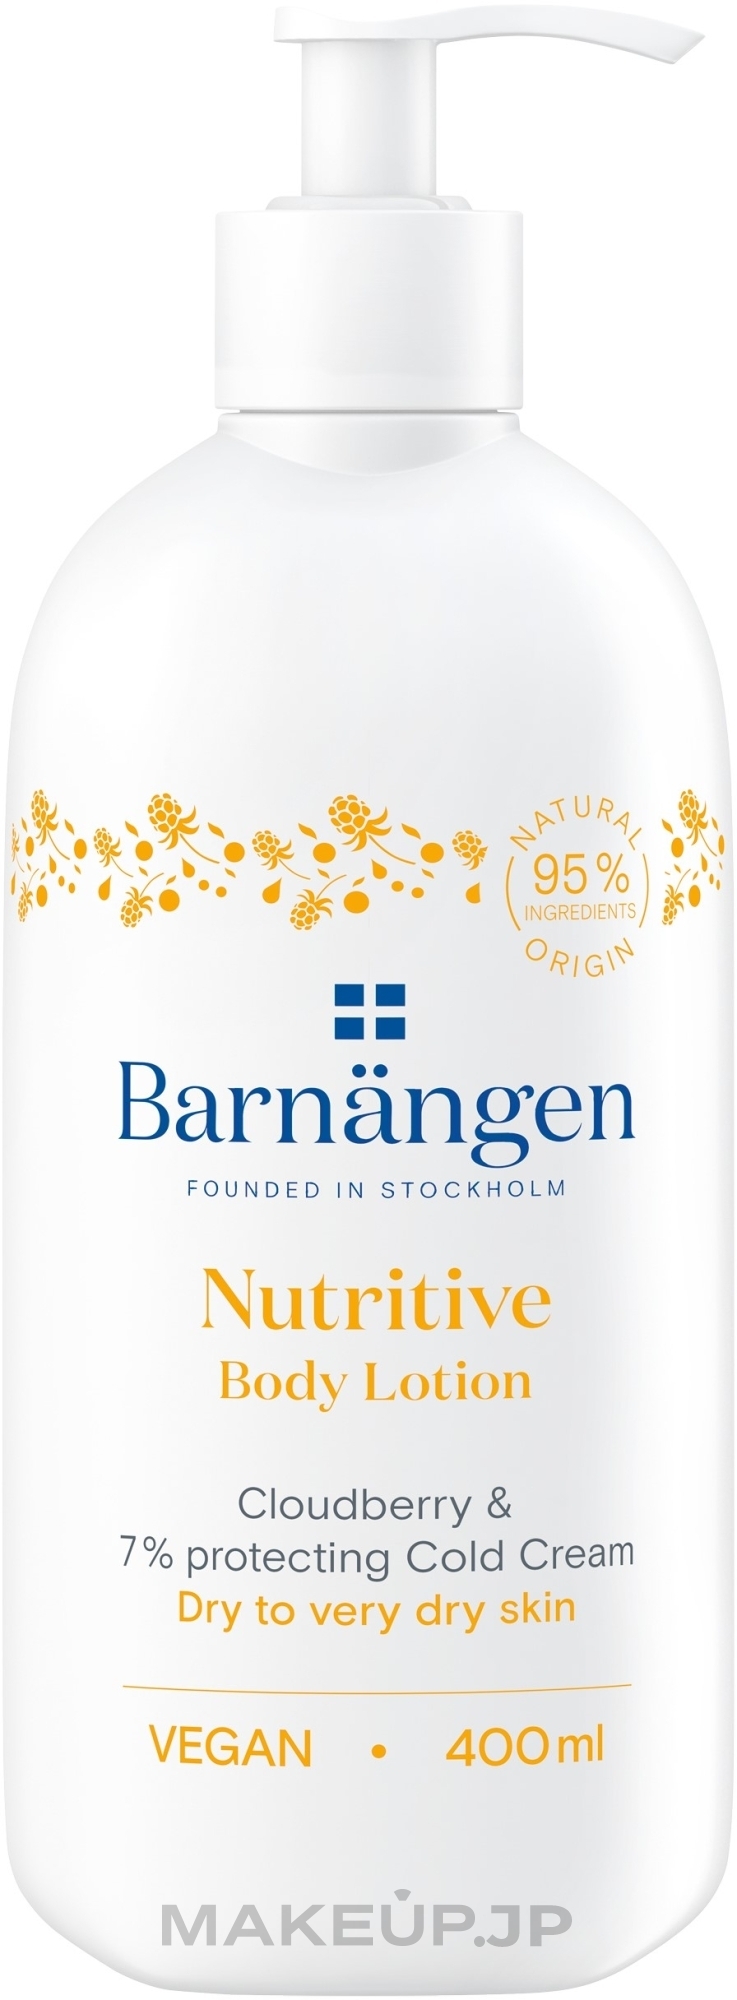 Body Lotion with Cloudberry for Dry and Very Dry Skin - Barnangen Nordic Care Nutritive Body Lotion — photo 400 ml